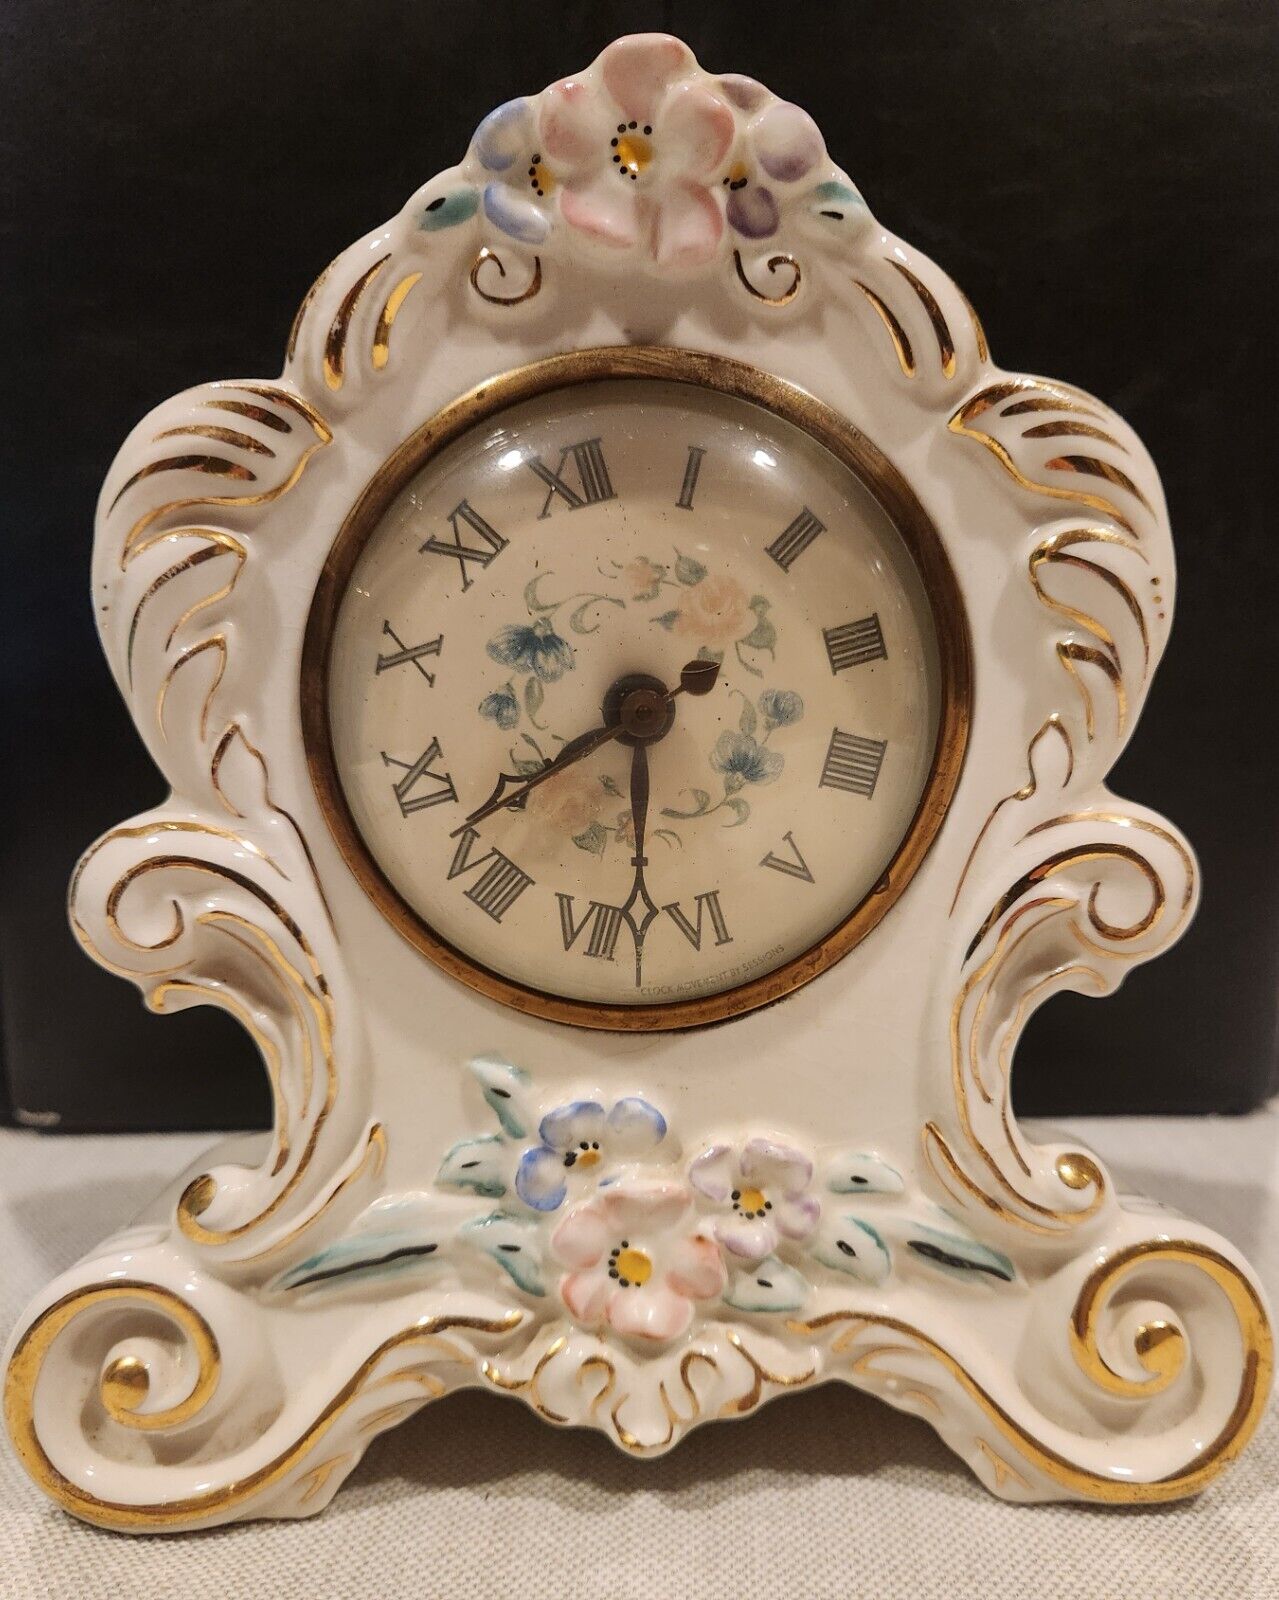 Vintage Rare Sessions porcelain electric mantle clock - made in CT